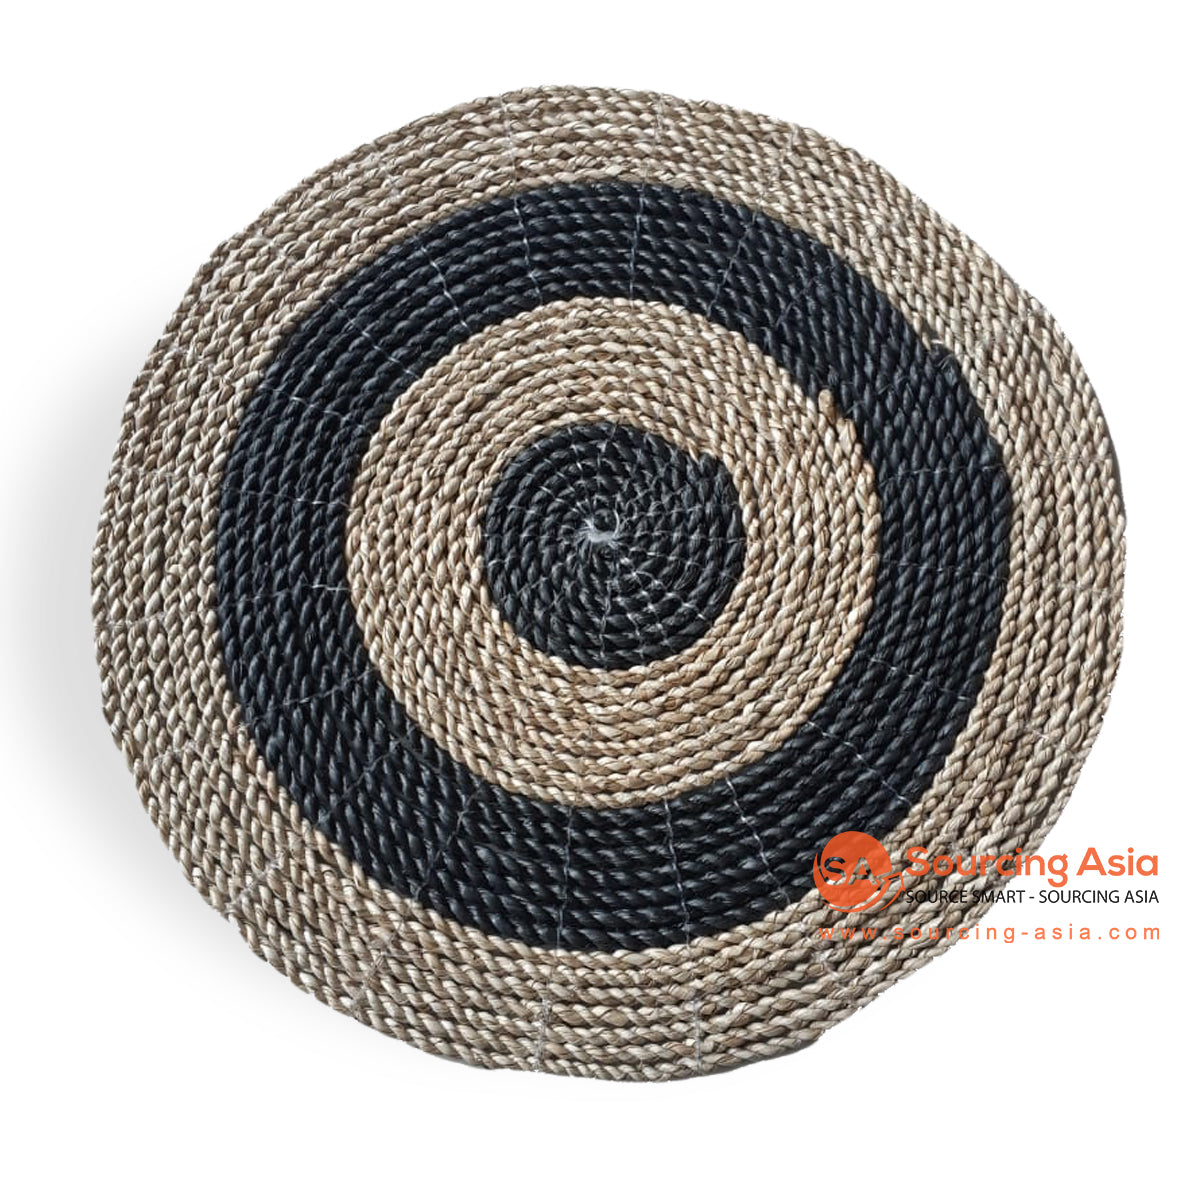 HBS069-1 BLACK AND NATURAL ROUND SEAGRASS PLACEMAT